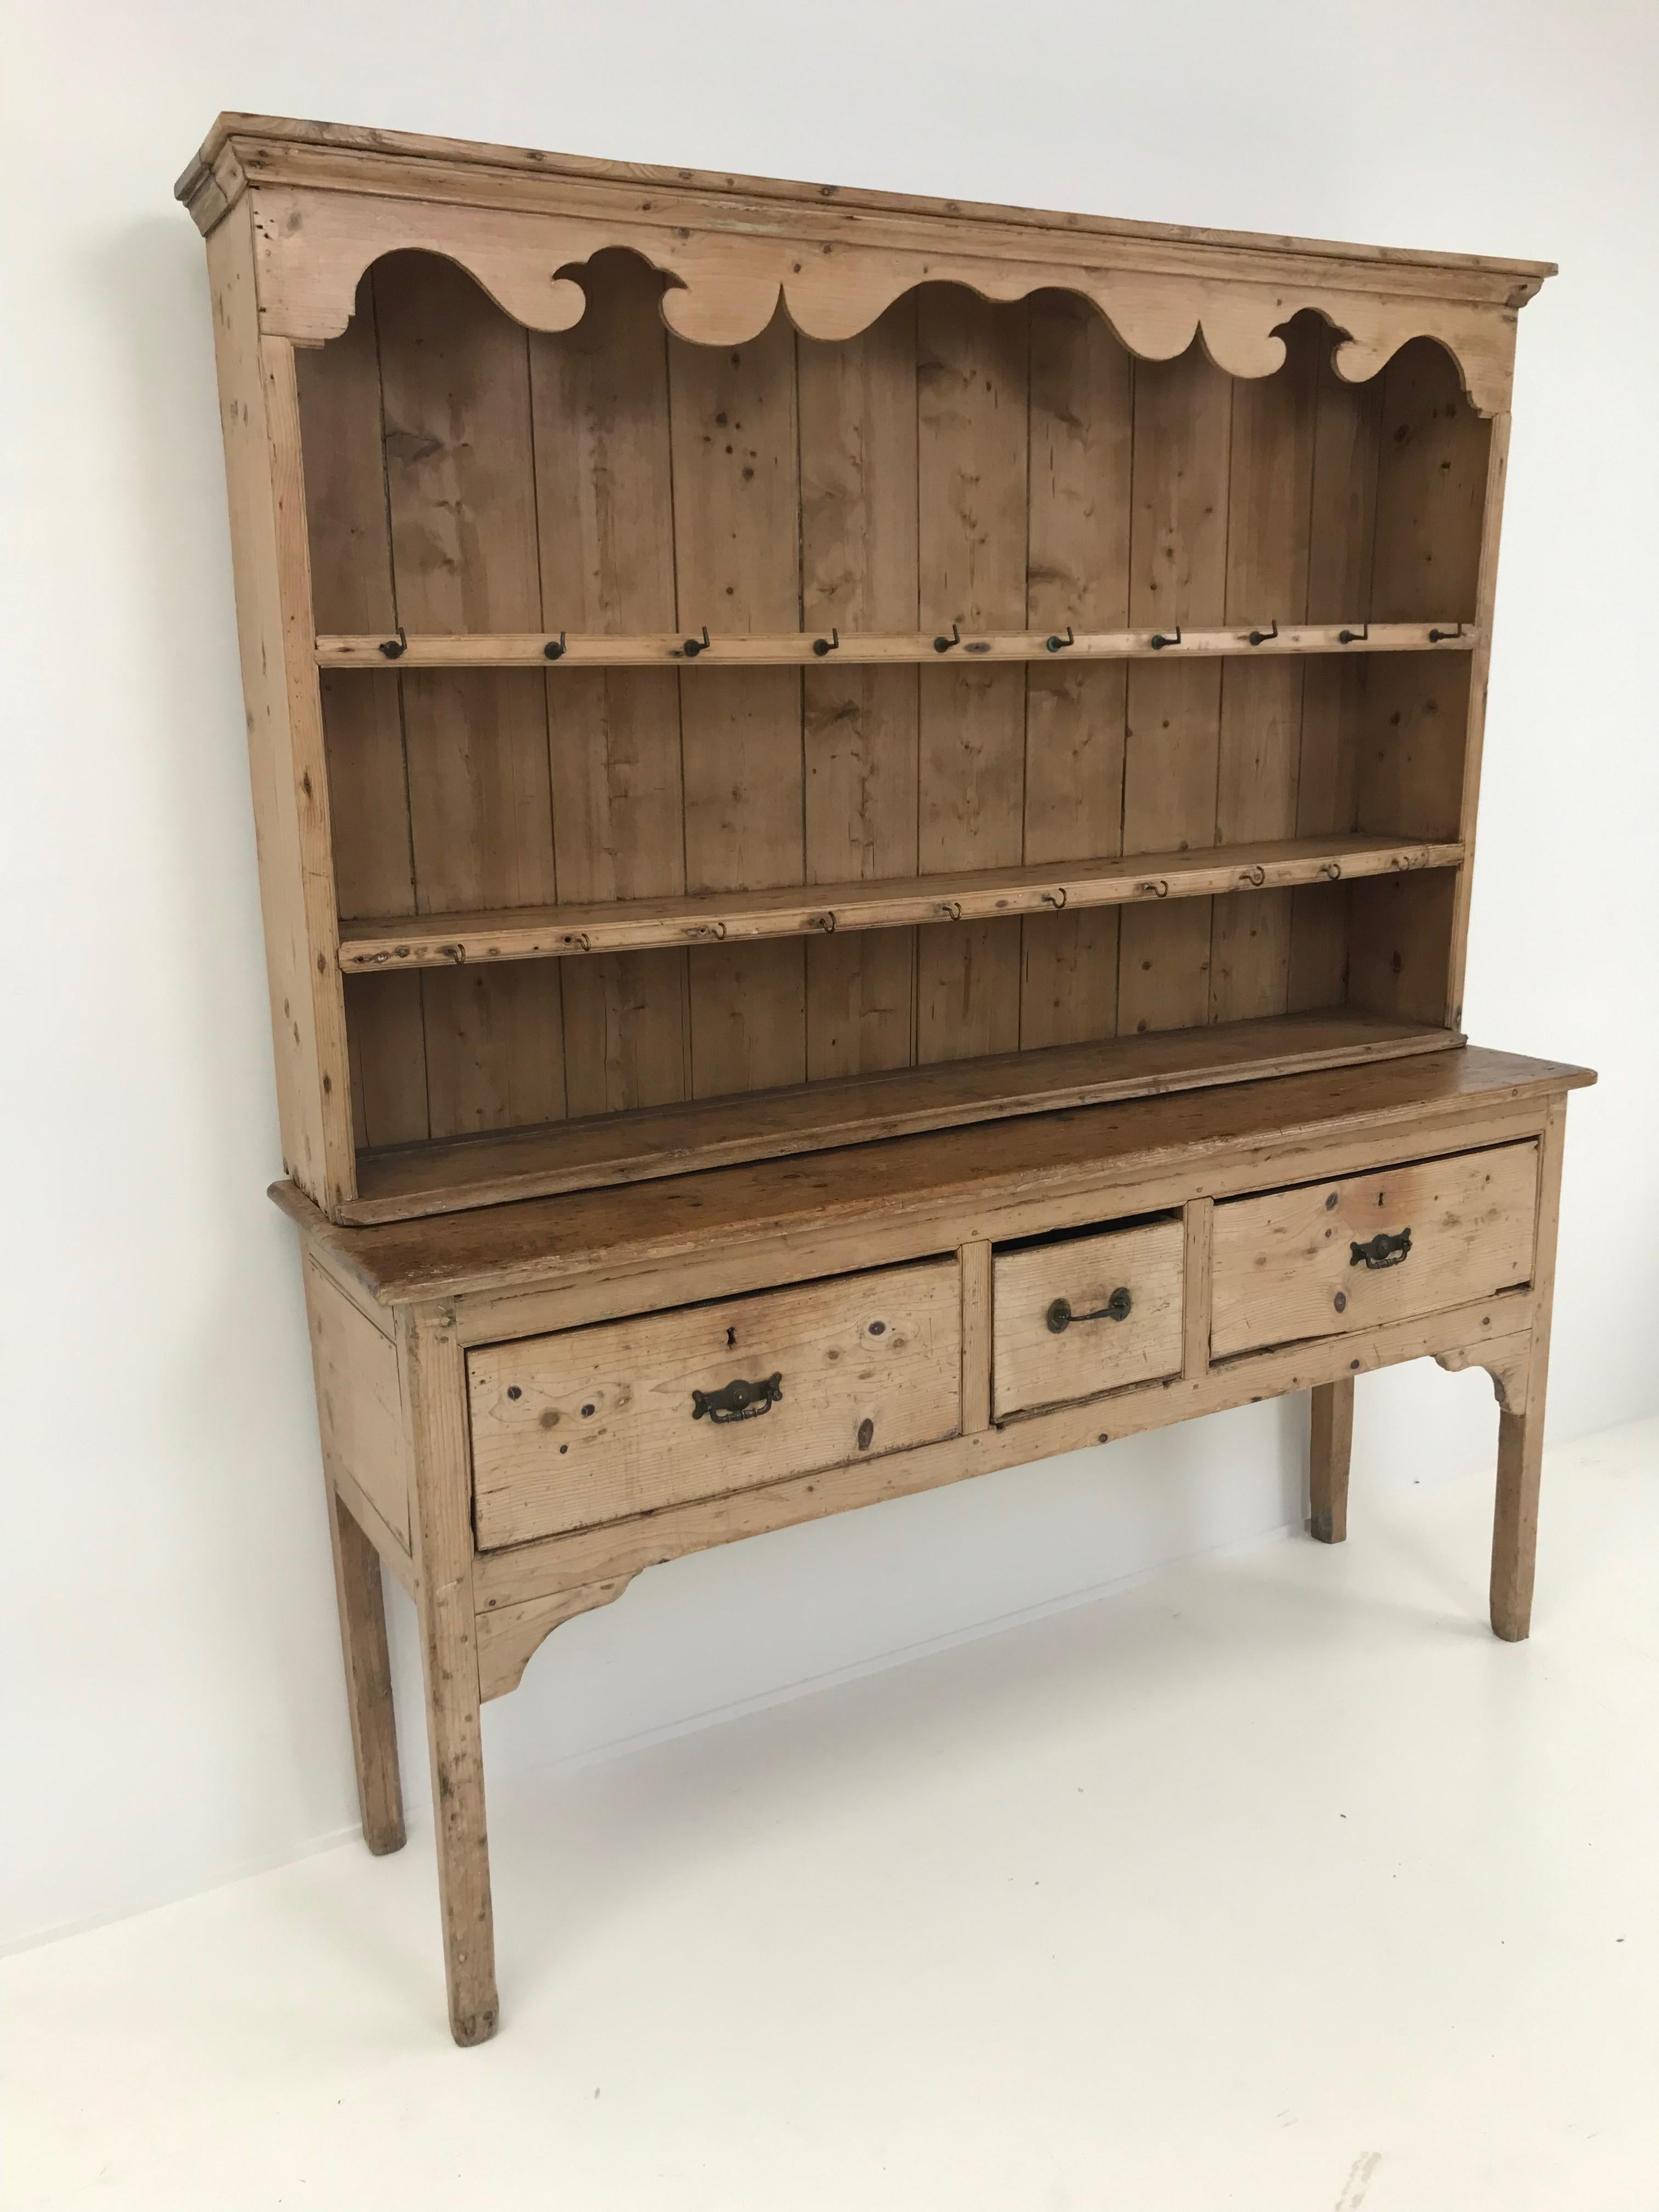 Bleached English Dresser with Top, 19th Century